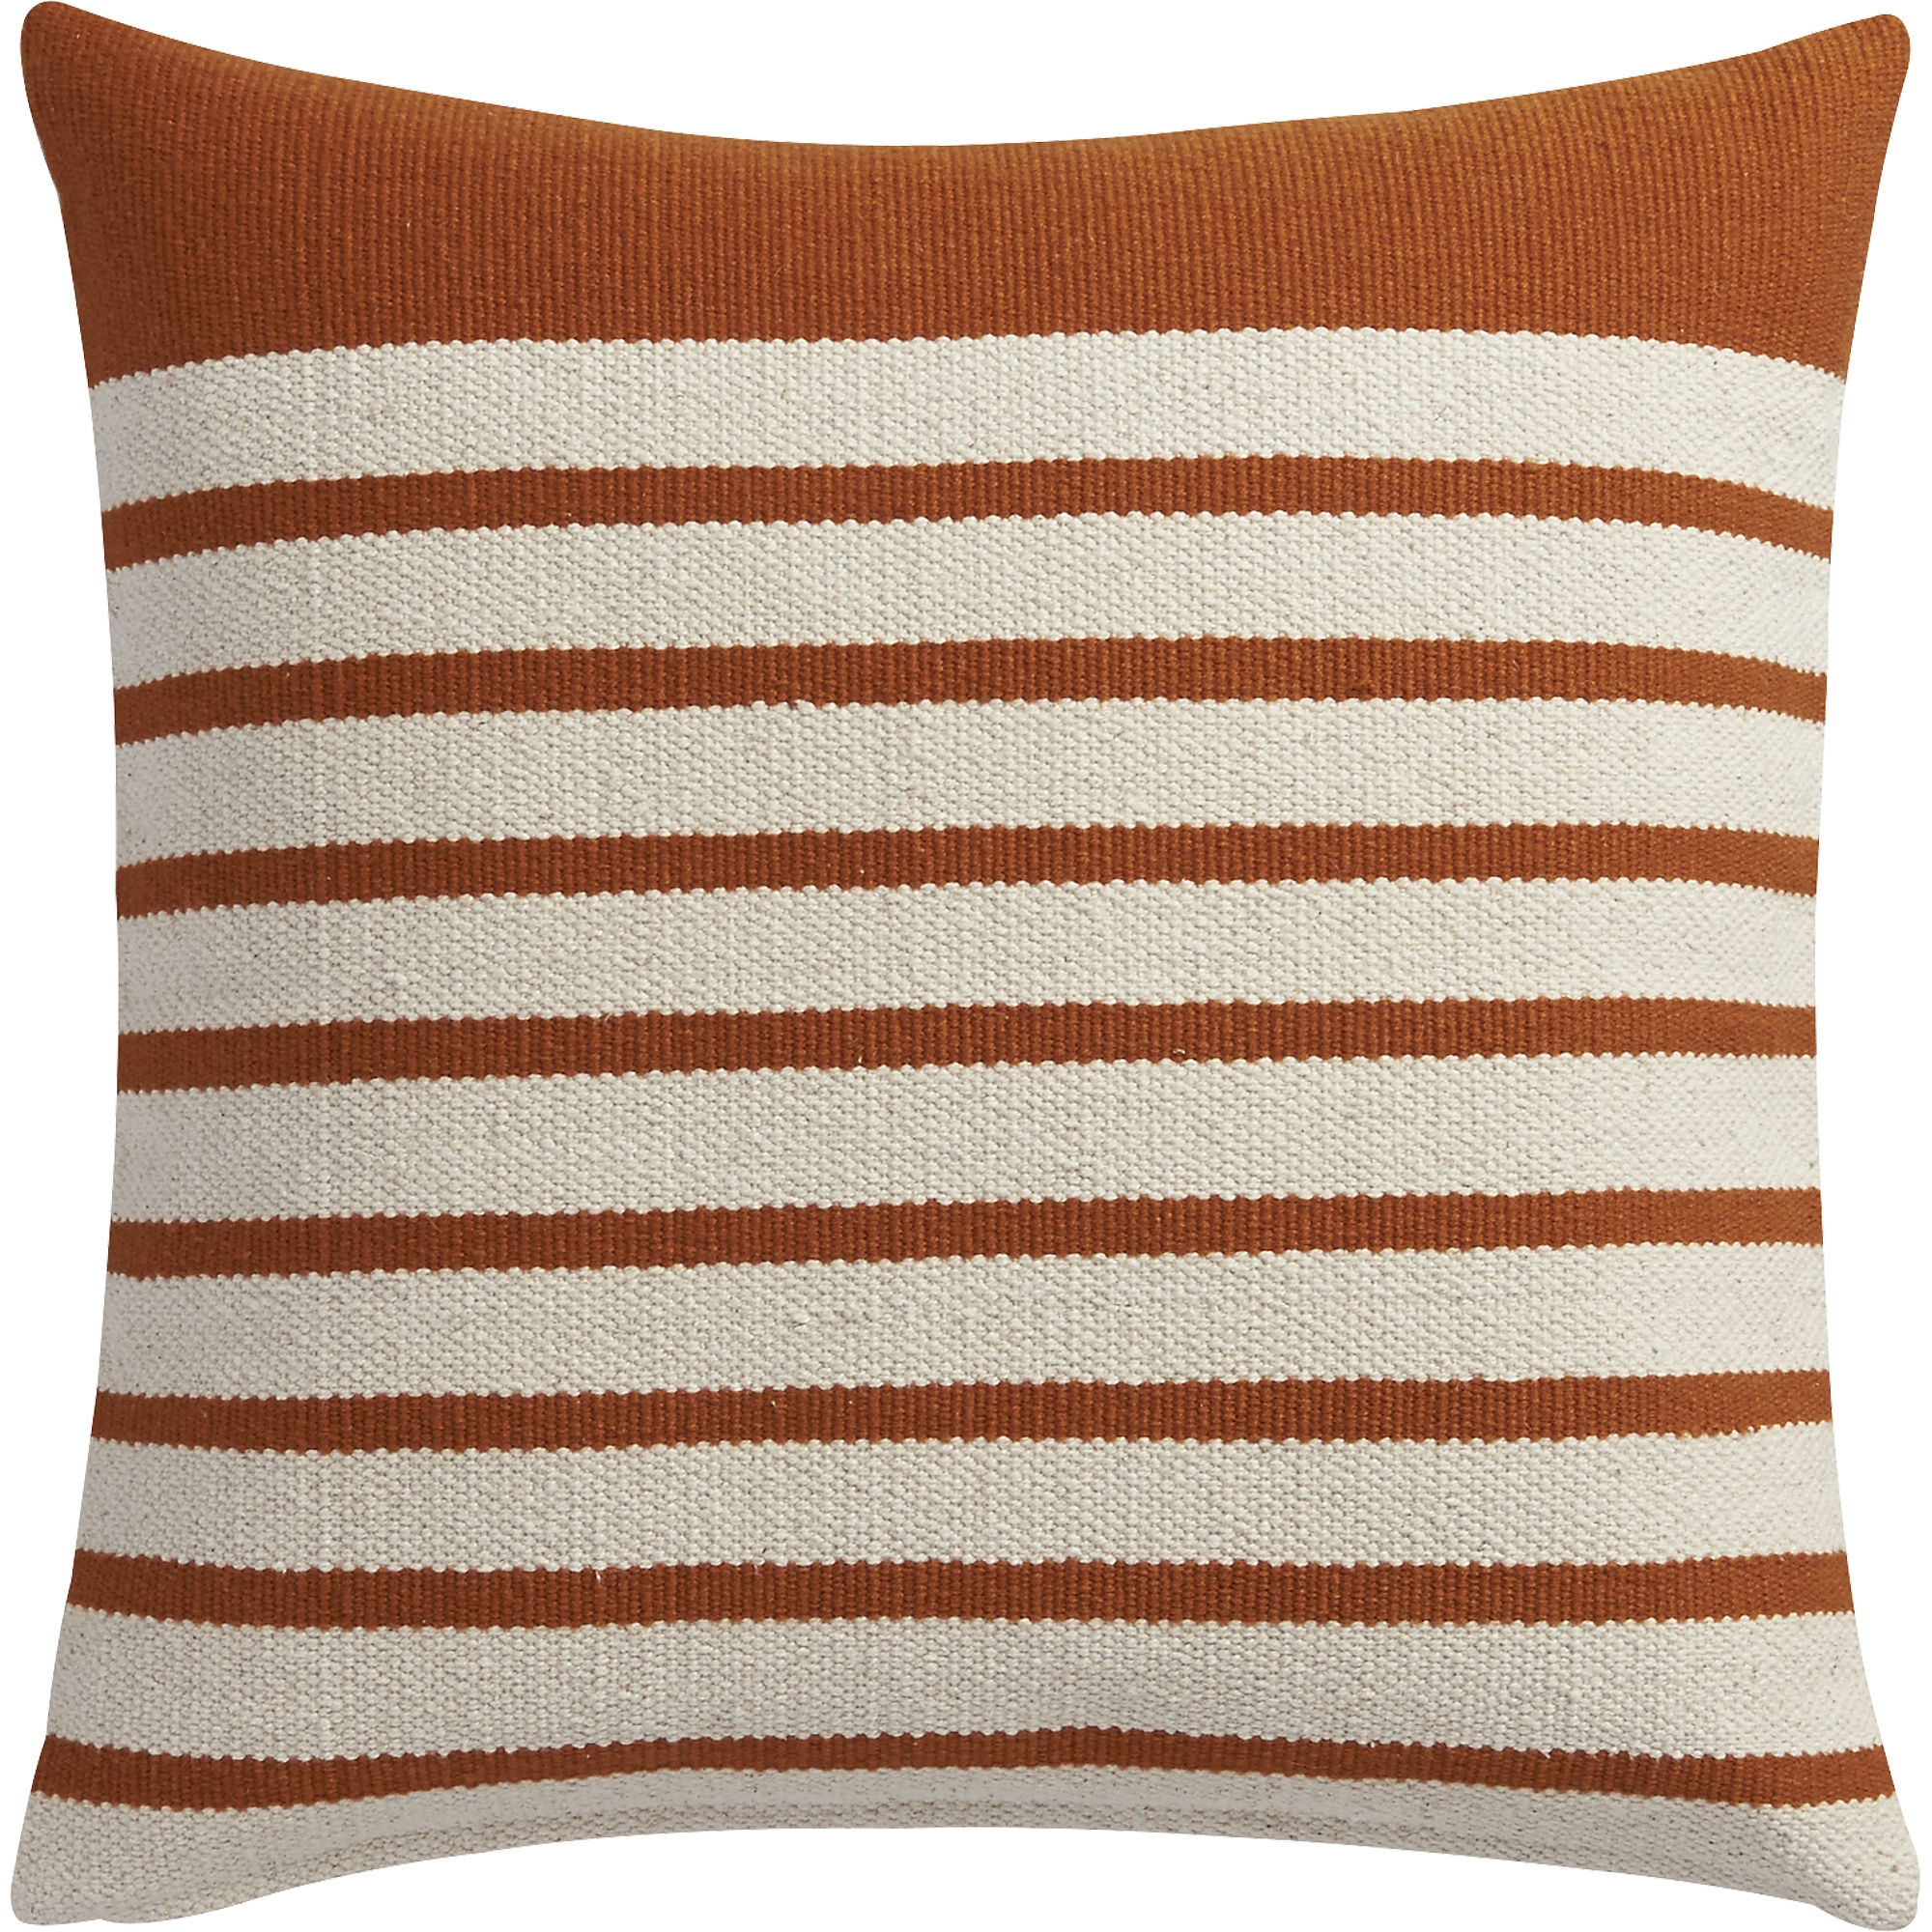 Division rust 20" pillow - Image 0